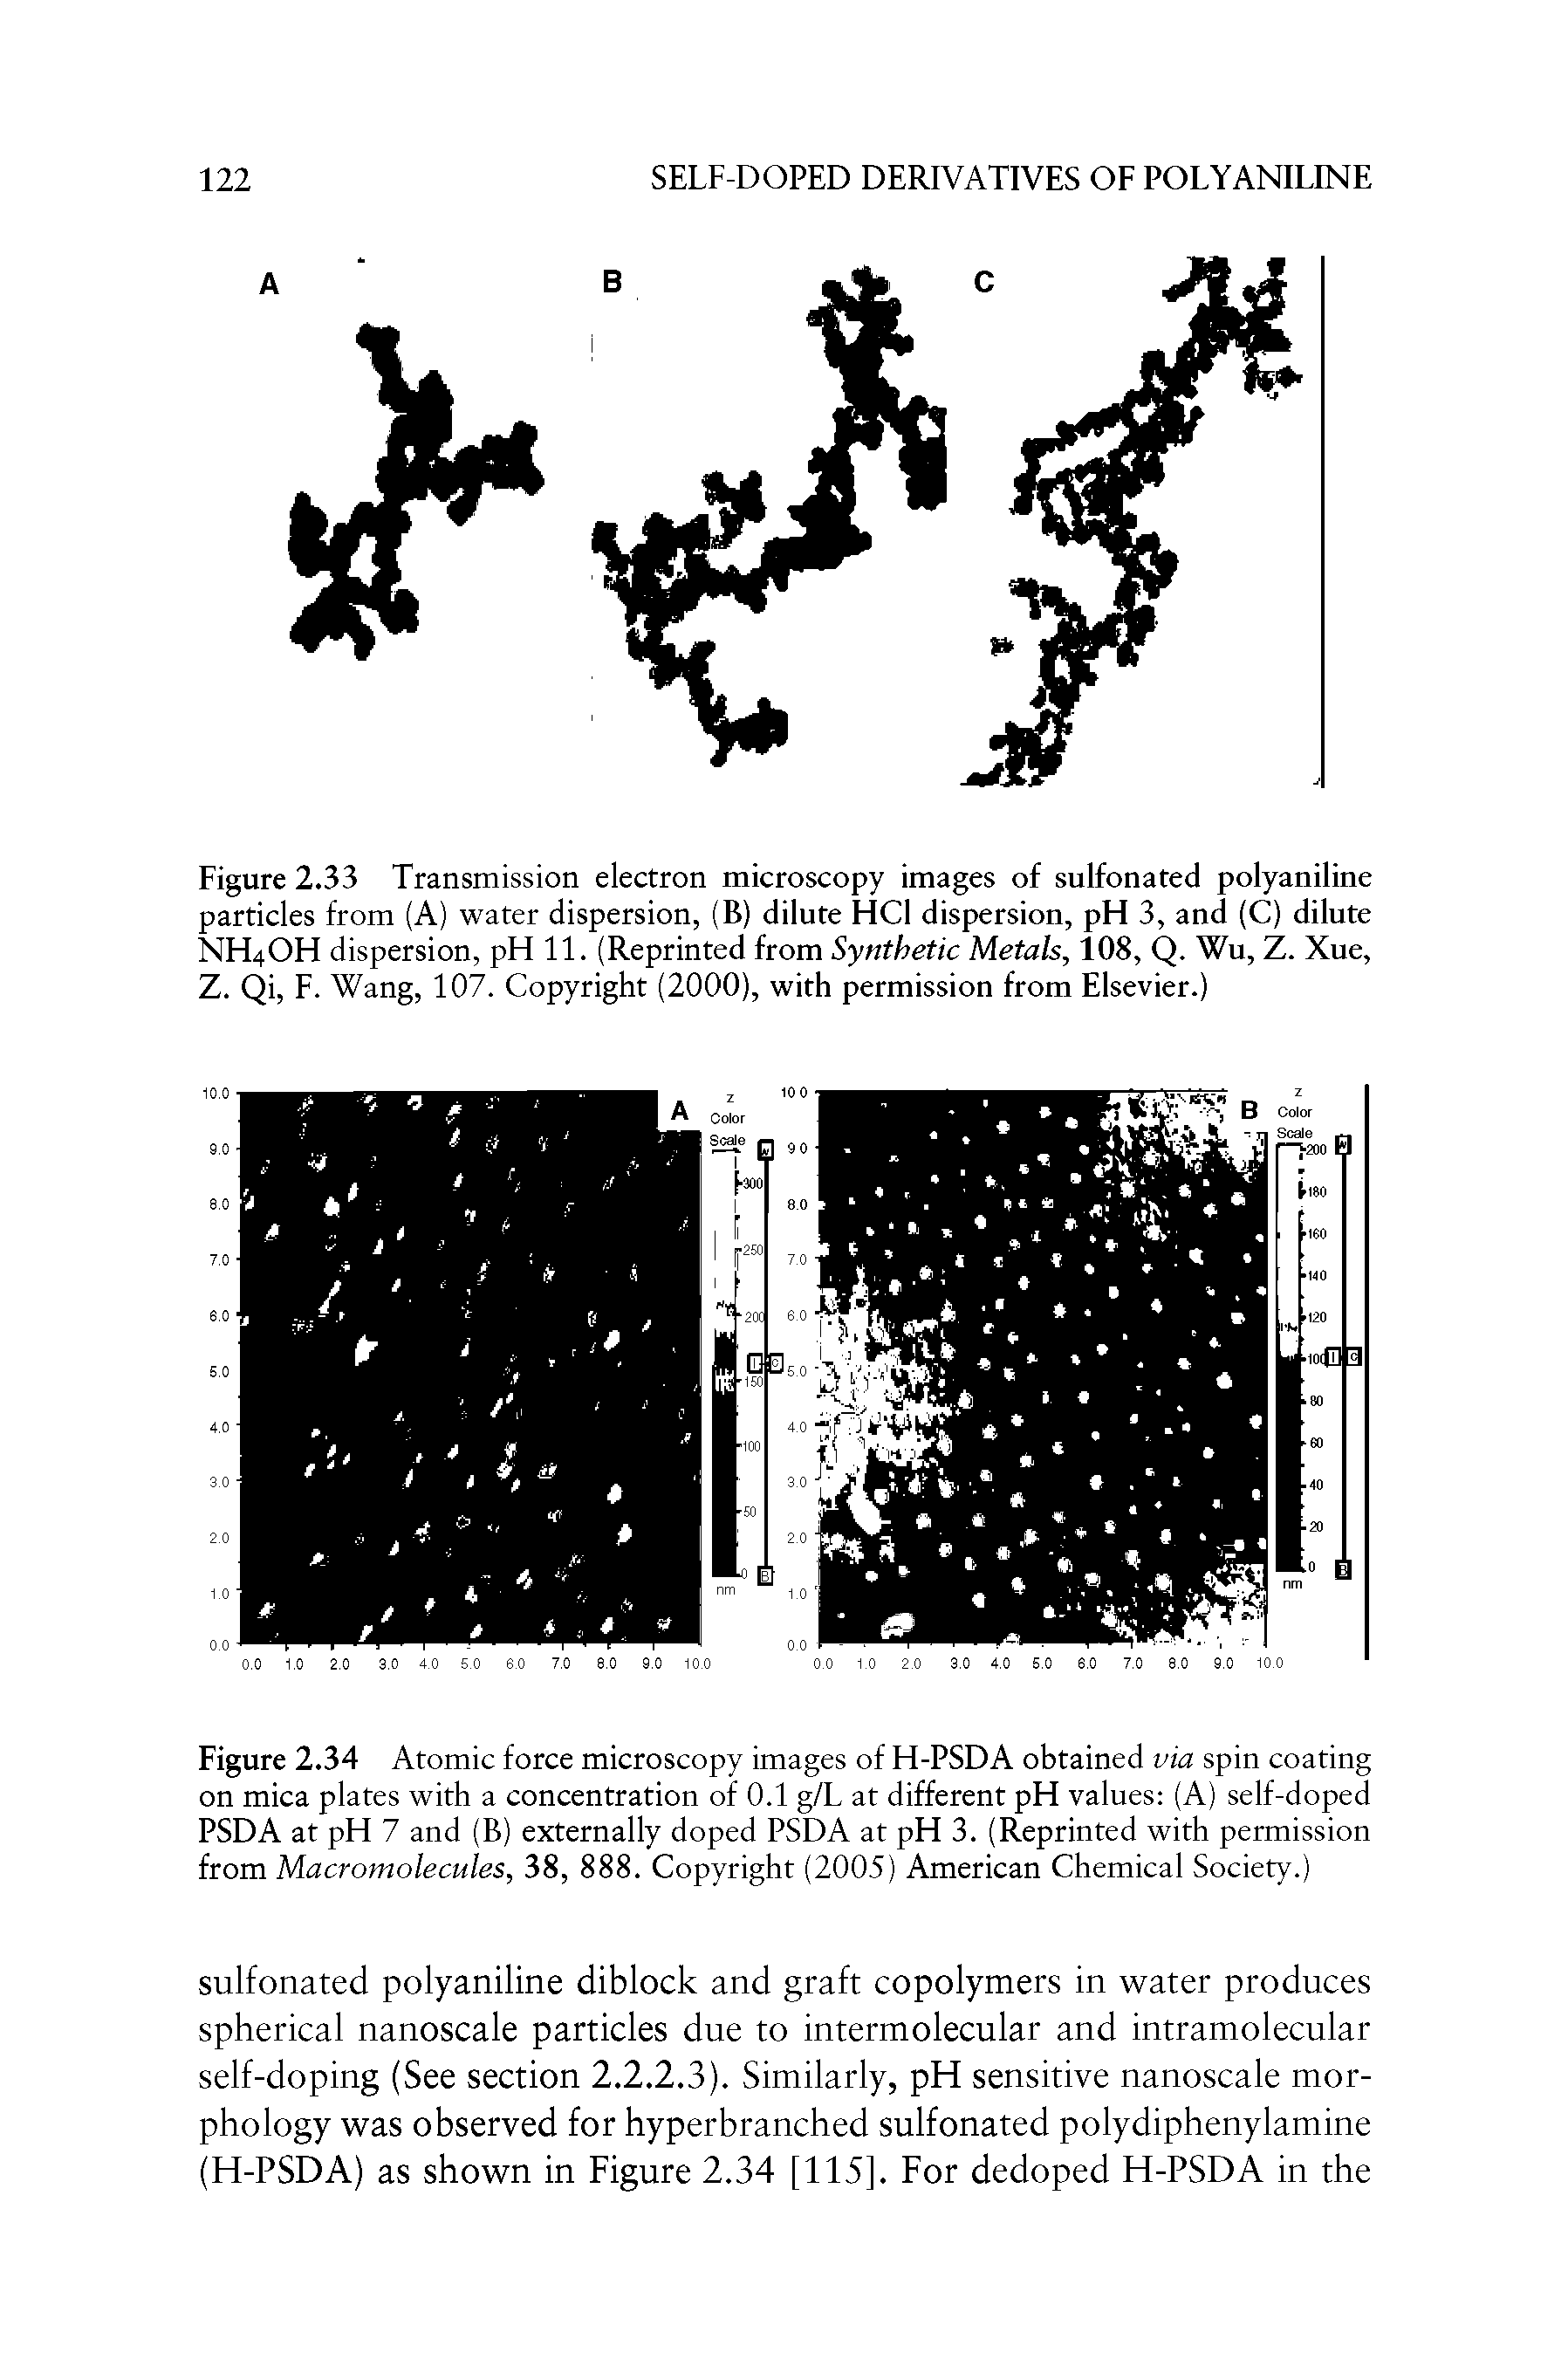 Figure 2.33 Transmission electron microscopy images of sulfonated polyaniline particles from (A) water dispersion, (B) dilute HCl dispersion, pH 3, and (C) dilute NH4OH dispersion, pH 11. (Reprinted from Synthetic Metals, 108, Q. Wu, Z. Xue, Z. Qi, F. Wang, 107. Copyright (2000), with permission from Elsevier.)...